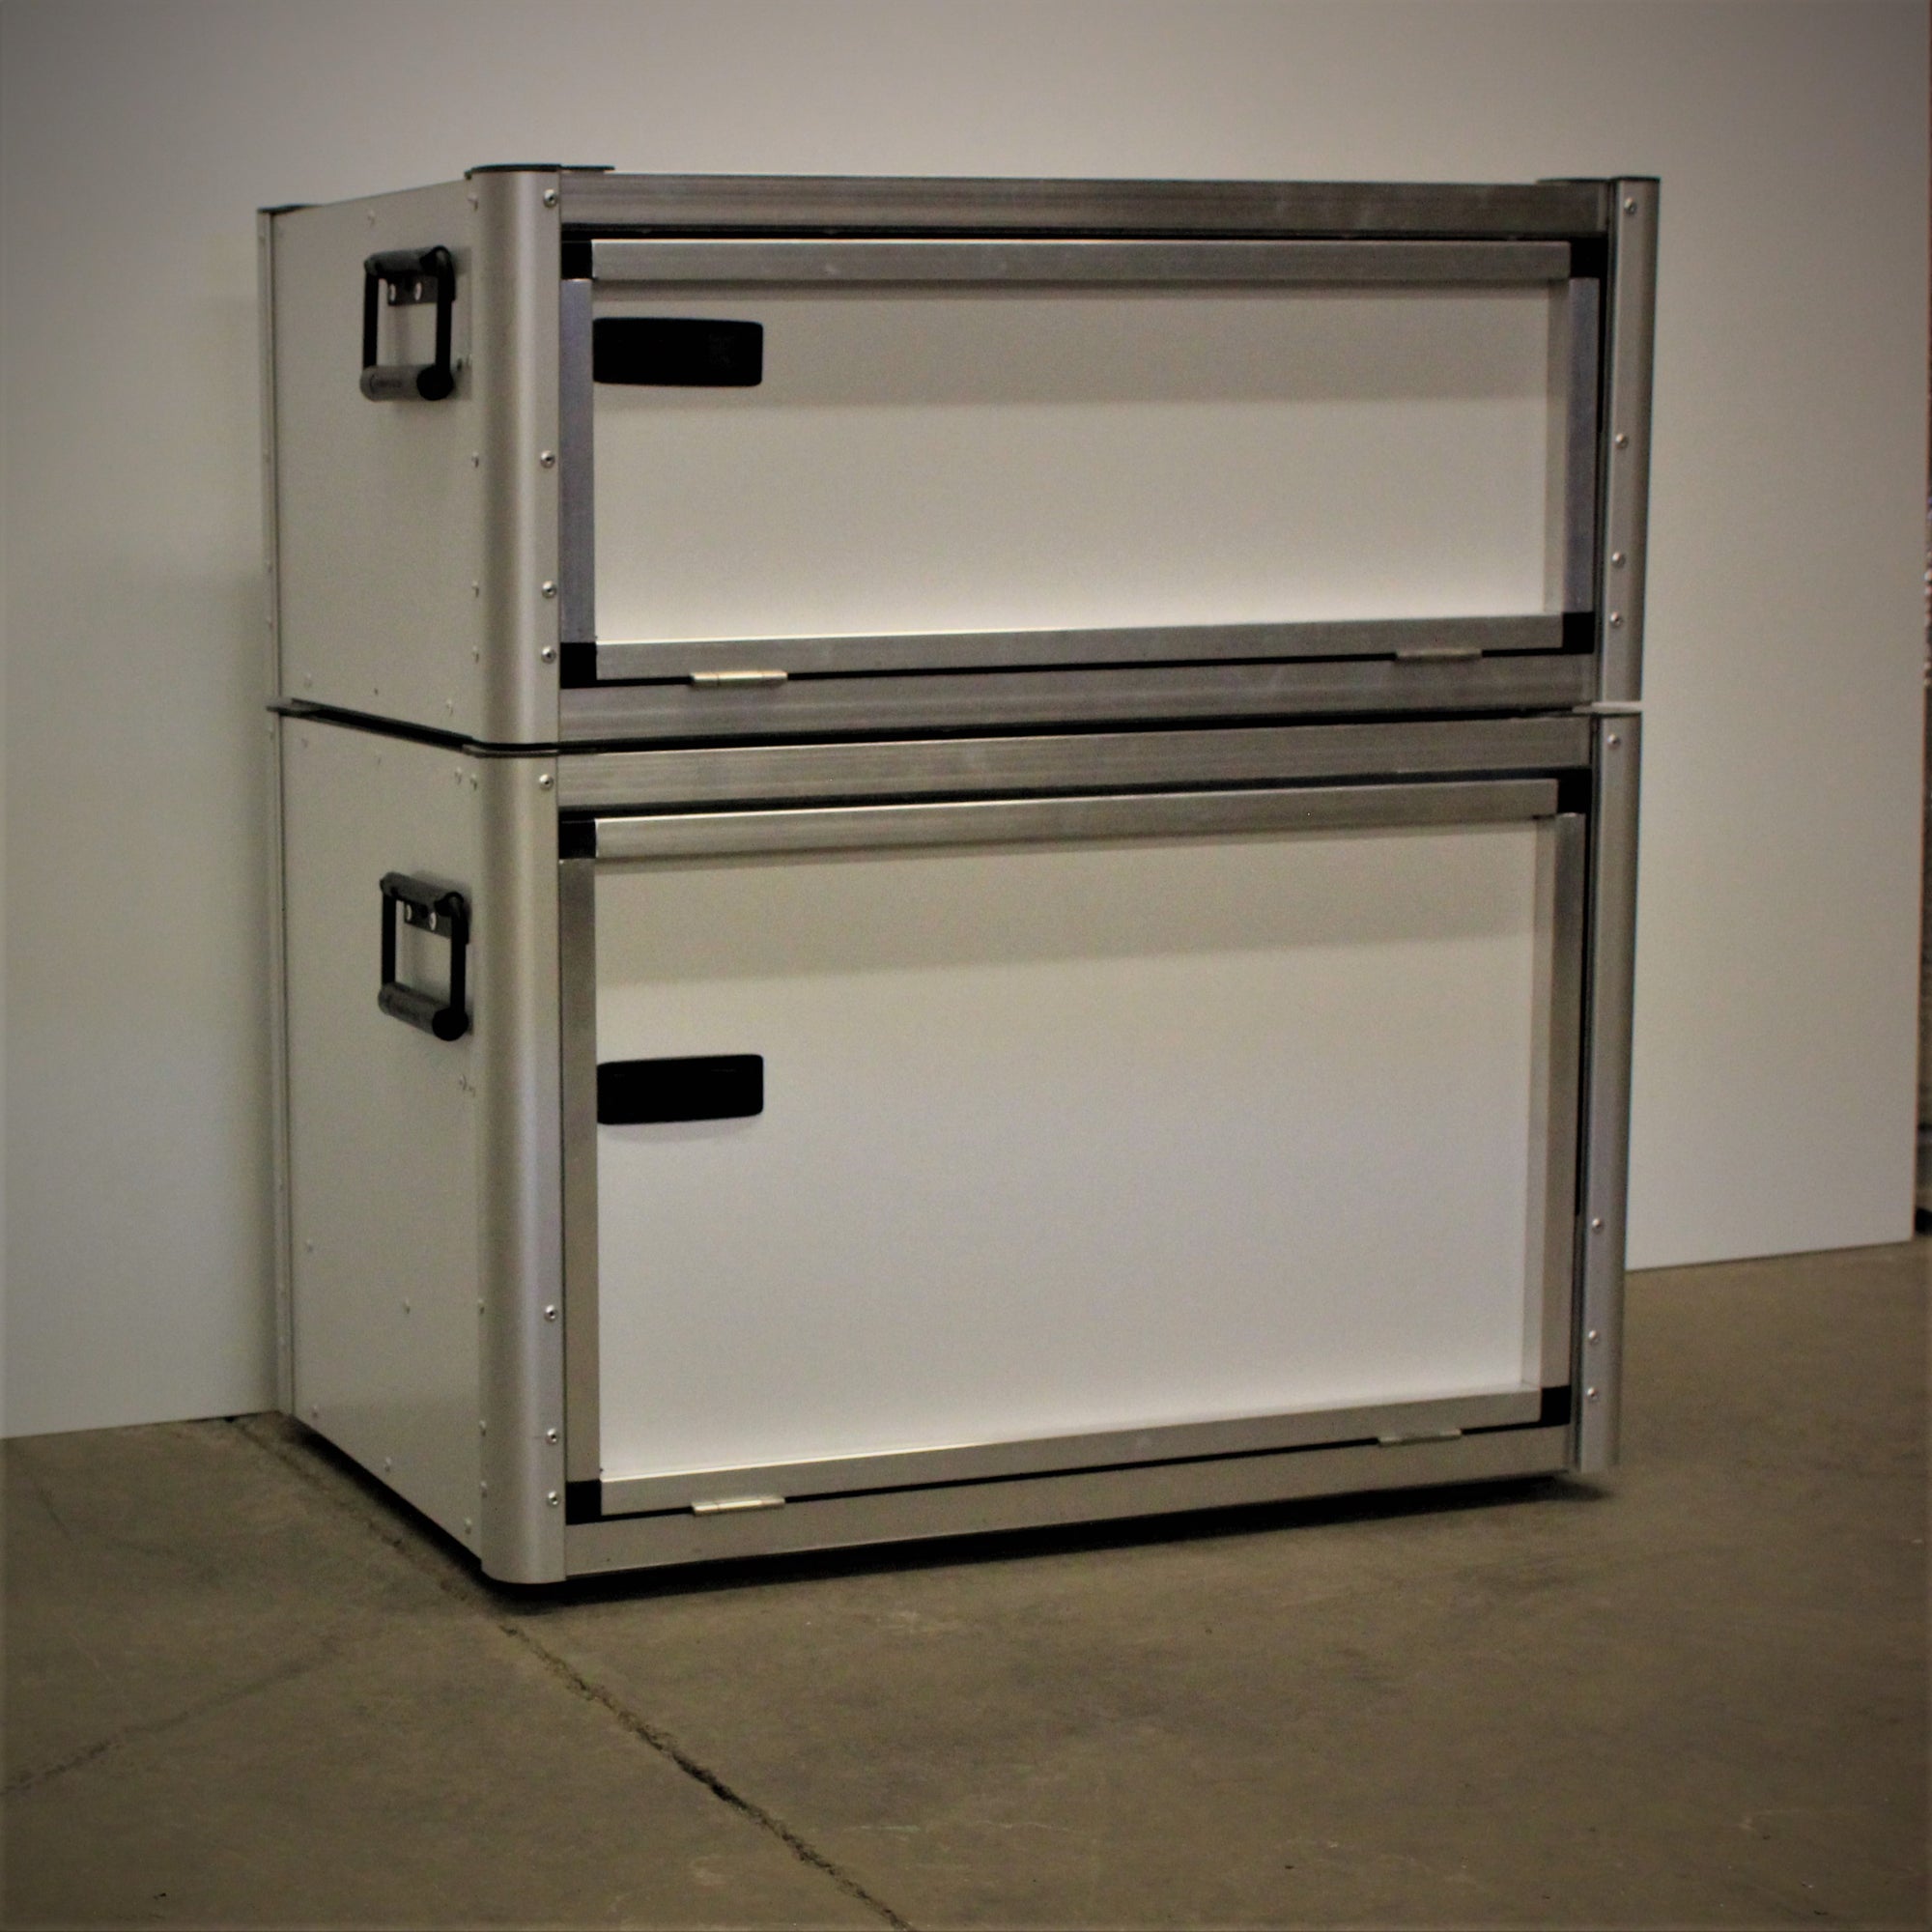 Two Sizes of Chuck Boxes by Trail Kitchens Portable Kitchens